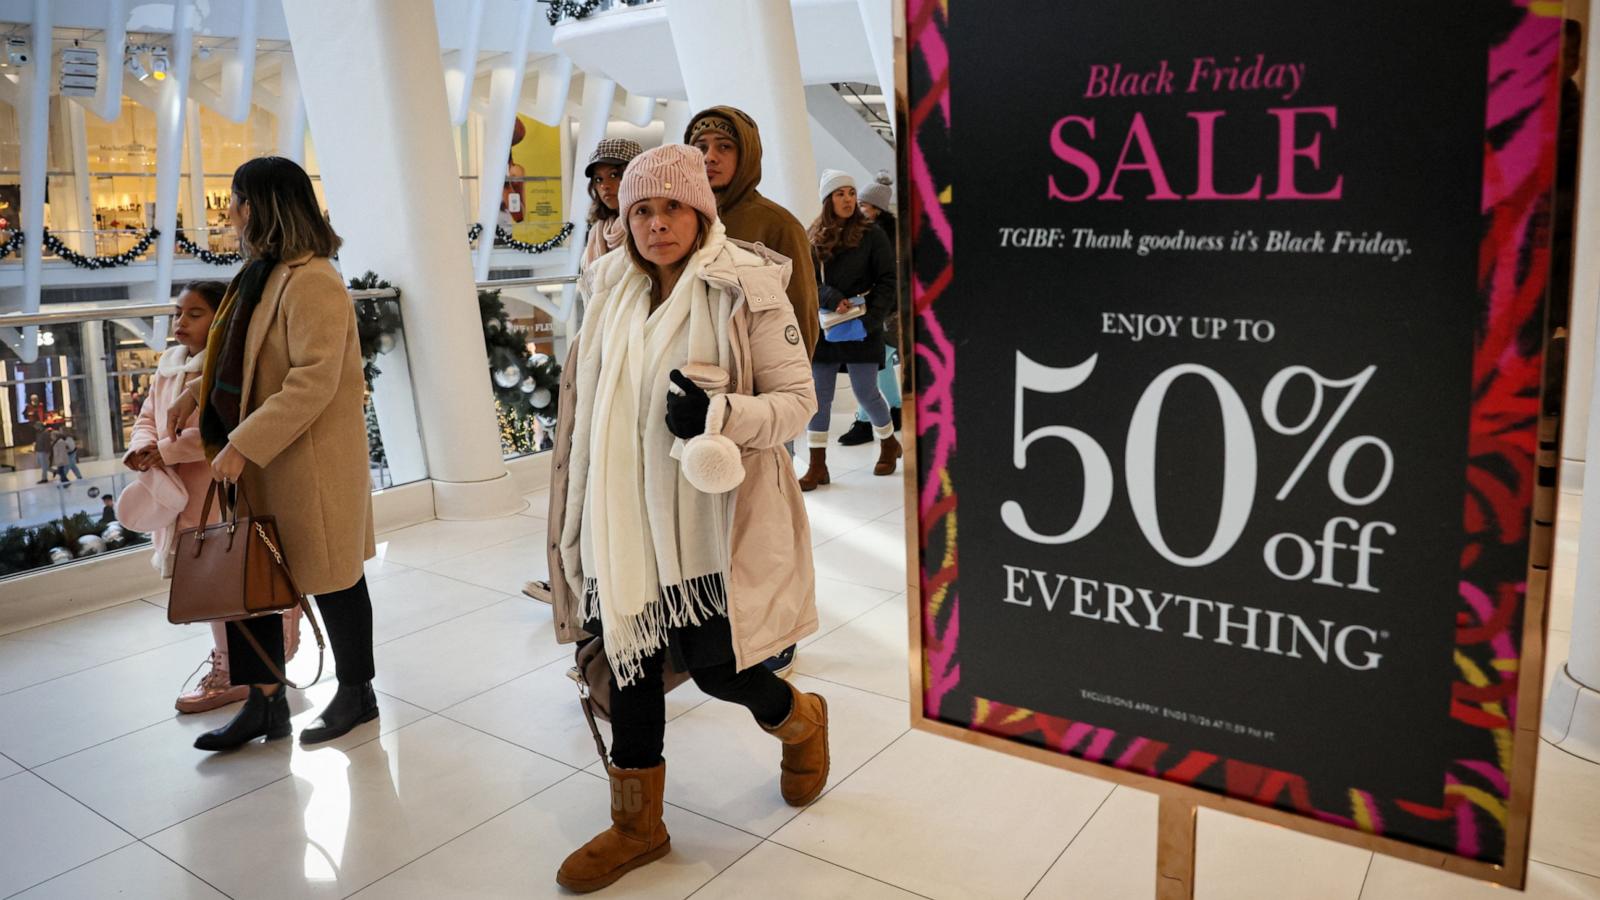 Black Friday shopping takeaways and what they mean for the economy - ABC  News